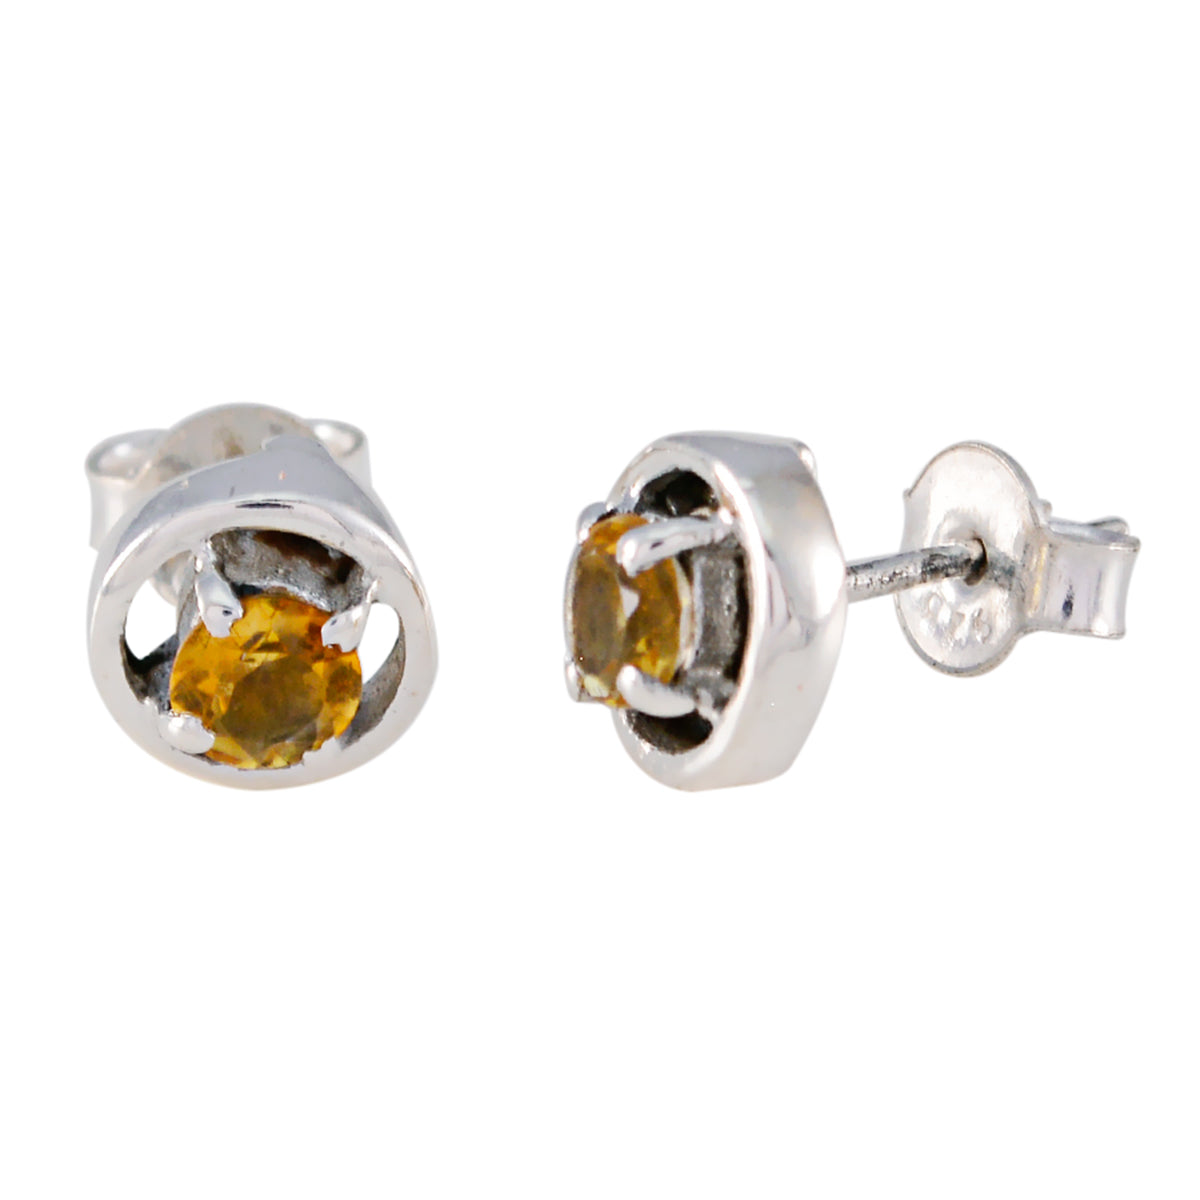 Riyo Real Gemstones round Faceted Yellow Citrine Silver Earrings gift for easter Sunday